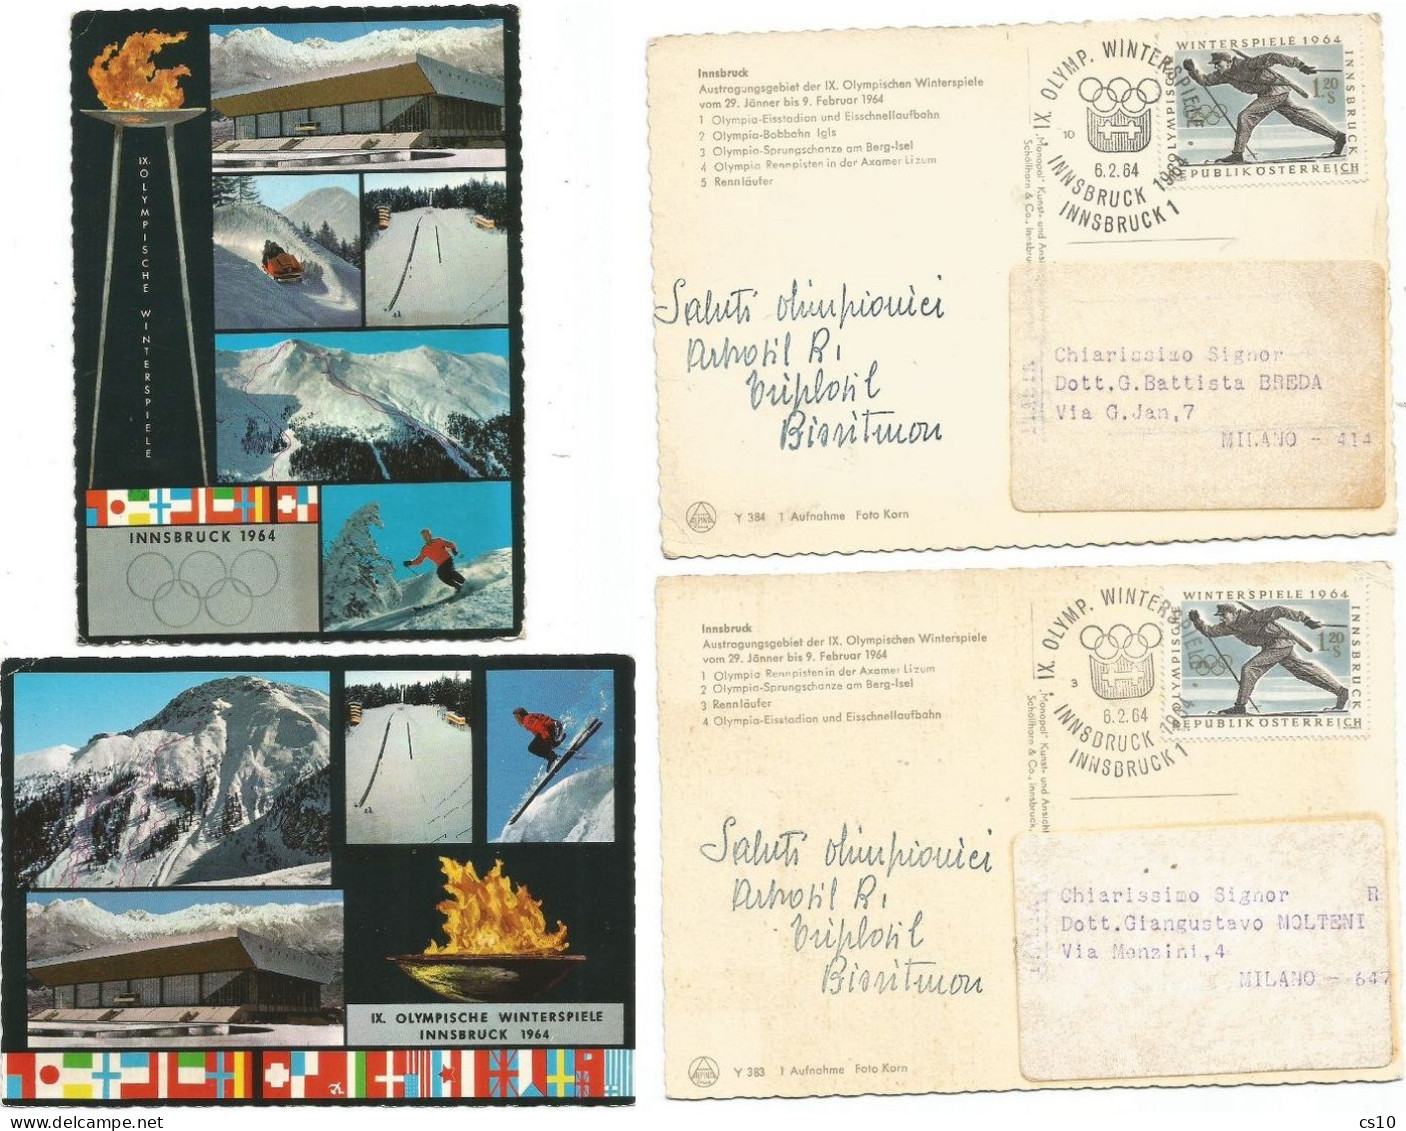 Winter Olympics 1964 Innsbruck Lot #4 Event Pcards With 3 Handsigns By Italian Athlets +# 2 ADV Promo Pcards Bioritmon - Juegos Olímpicos